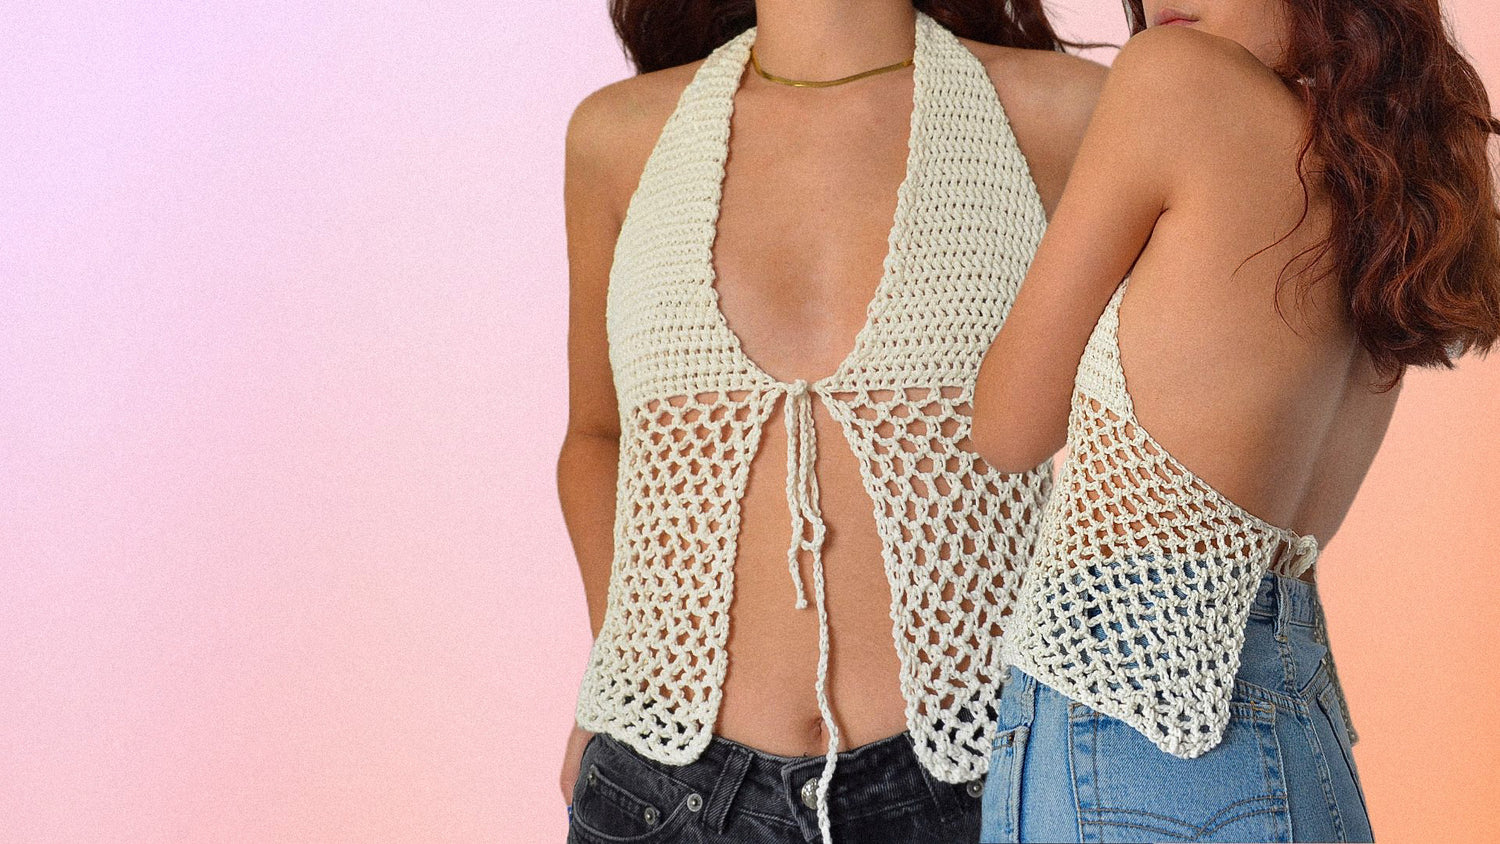 MagoMade's Newest Pattern Release Beachy Top - A Halter Neck Top With See-Through Mesh Panels